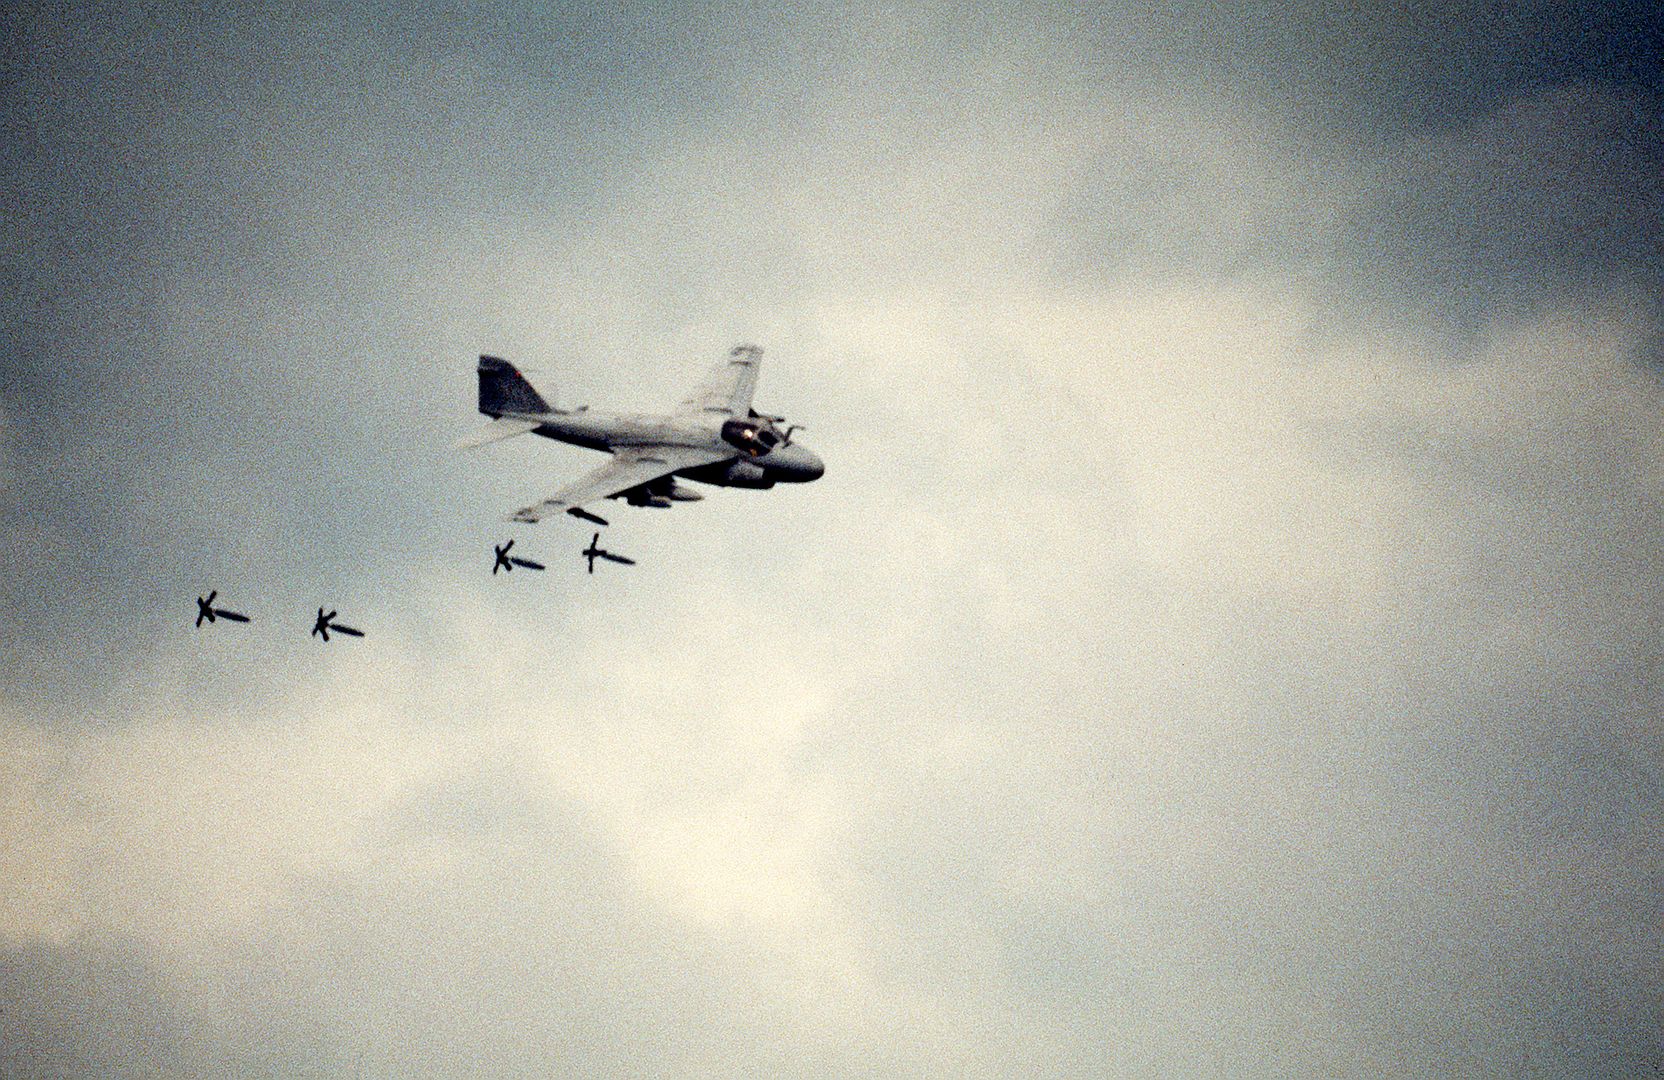 A 6 Intruder Aircraft As It Drops Mark 82 High Drag Bombs Over The Crow Valley Range During Exercise Cope Thunder 83 7